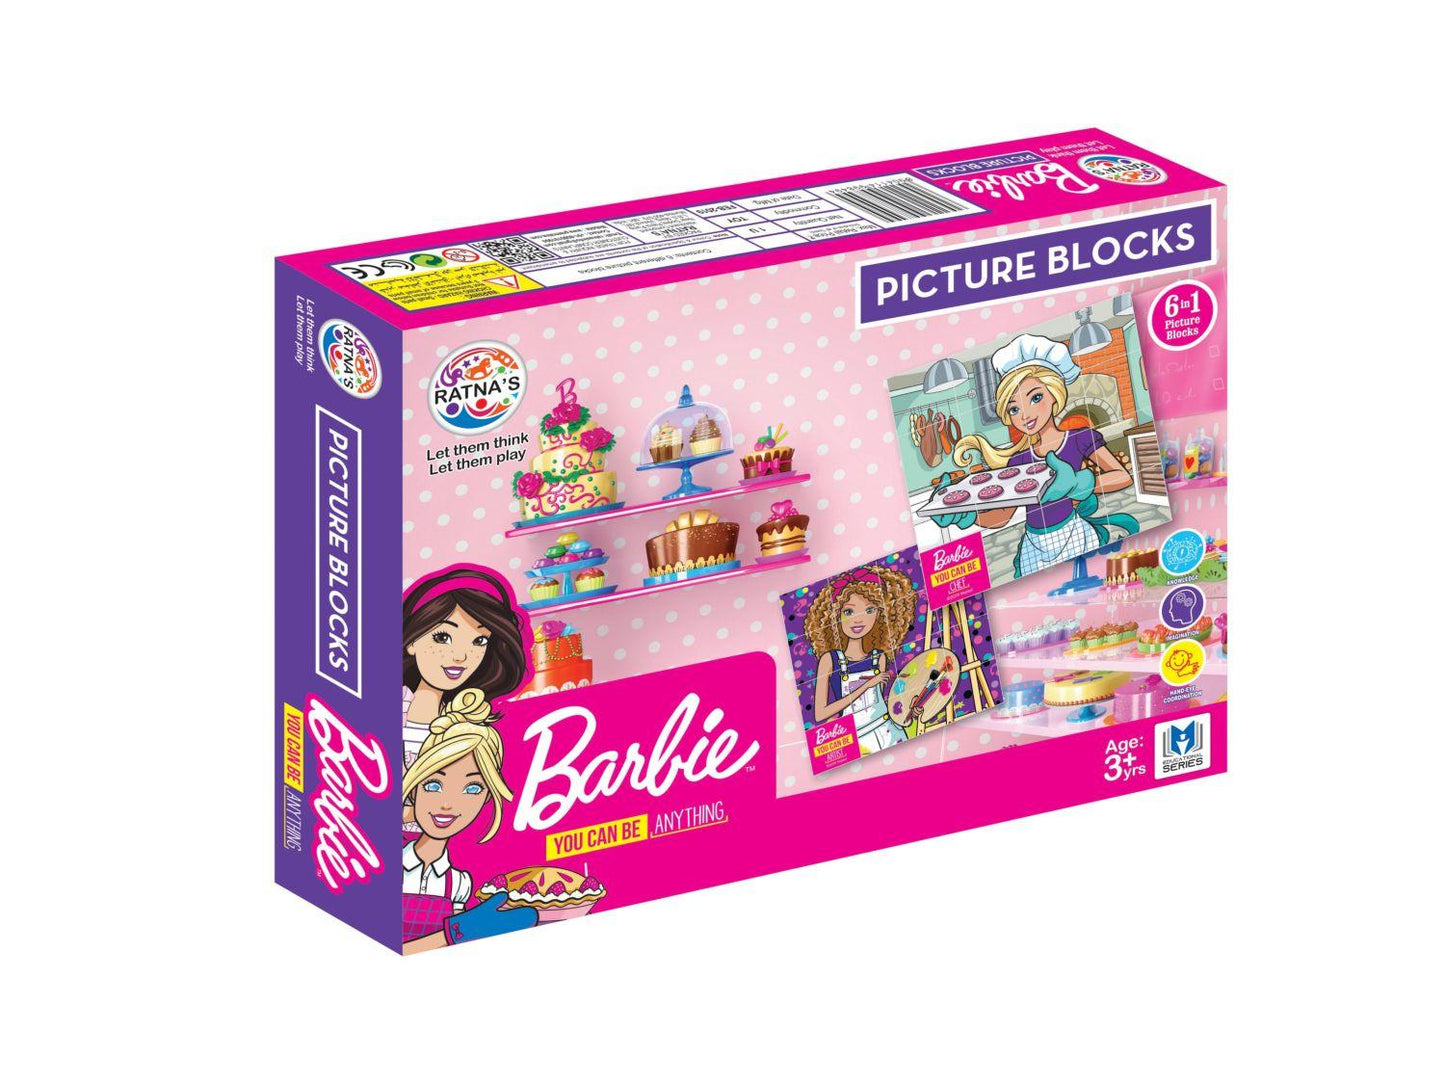 RATNA'S Barbie 6 in 1 Career Oriented Picture Blocks for Girls.